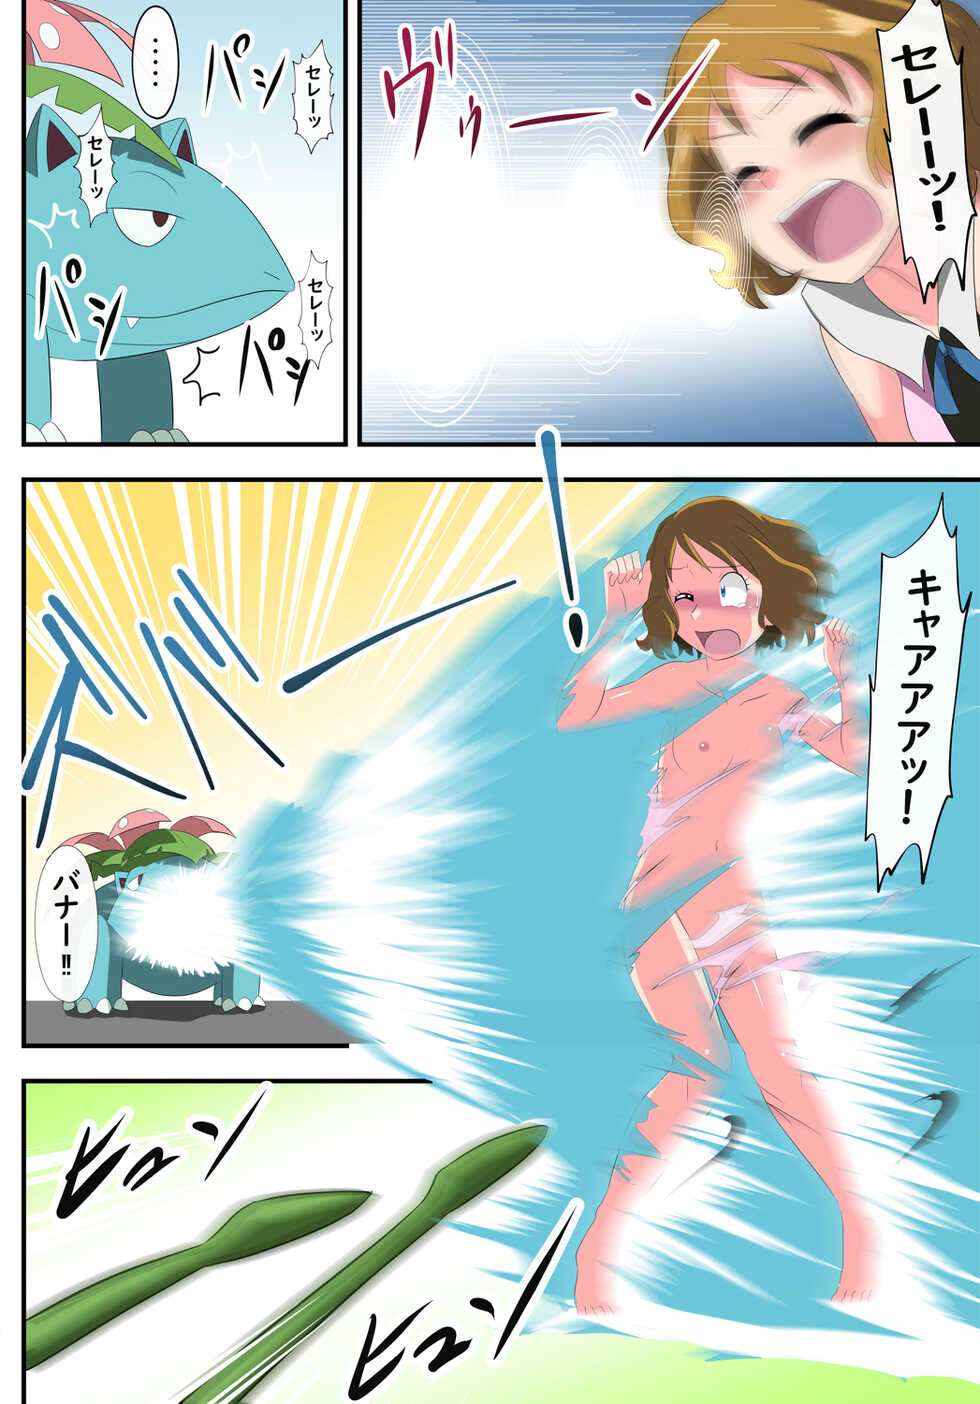 shinenkan  モンスターと思われて捕獲されちゃった！They thought I was a pokemon and captured me ! - Page 8